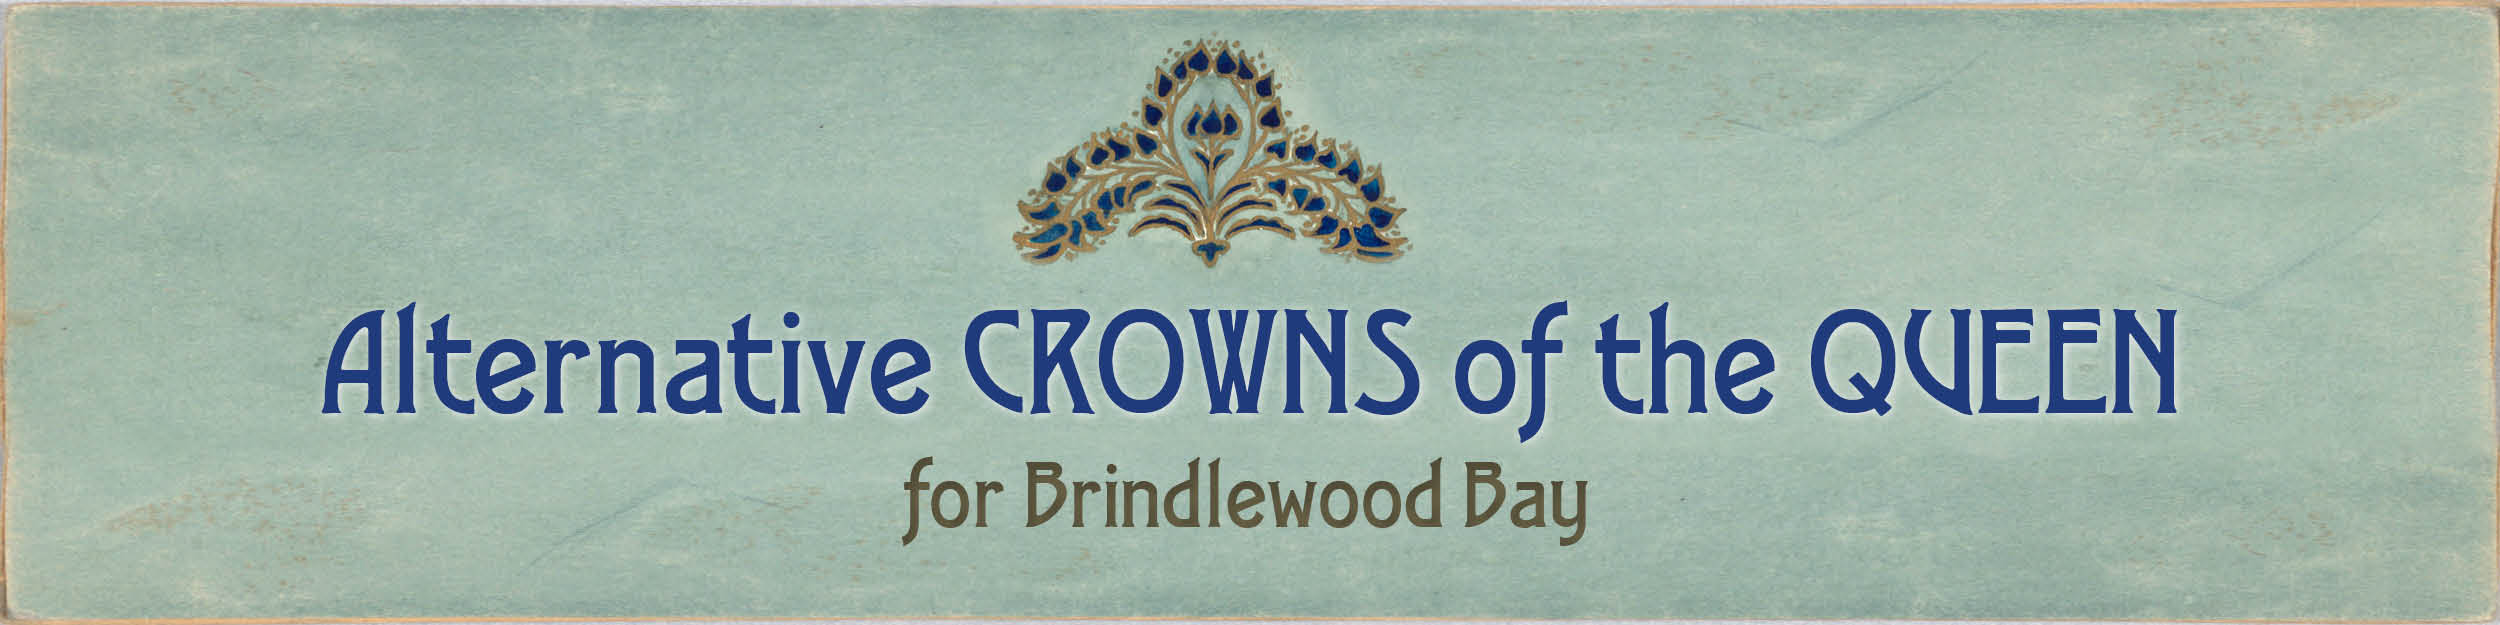 Alternative Crowns of the Queen for Brindlewood Bay